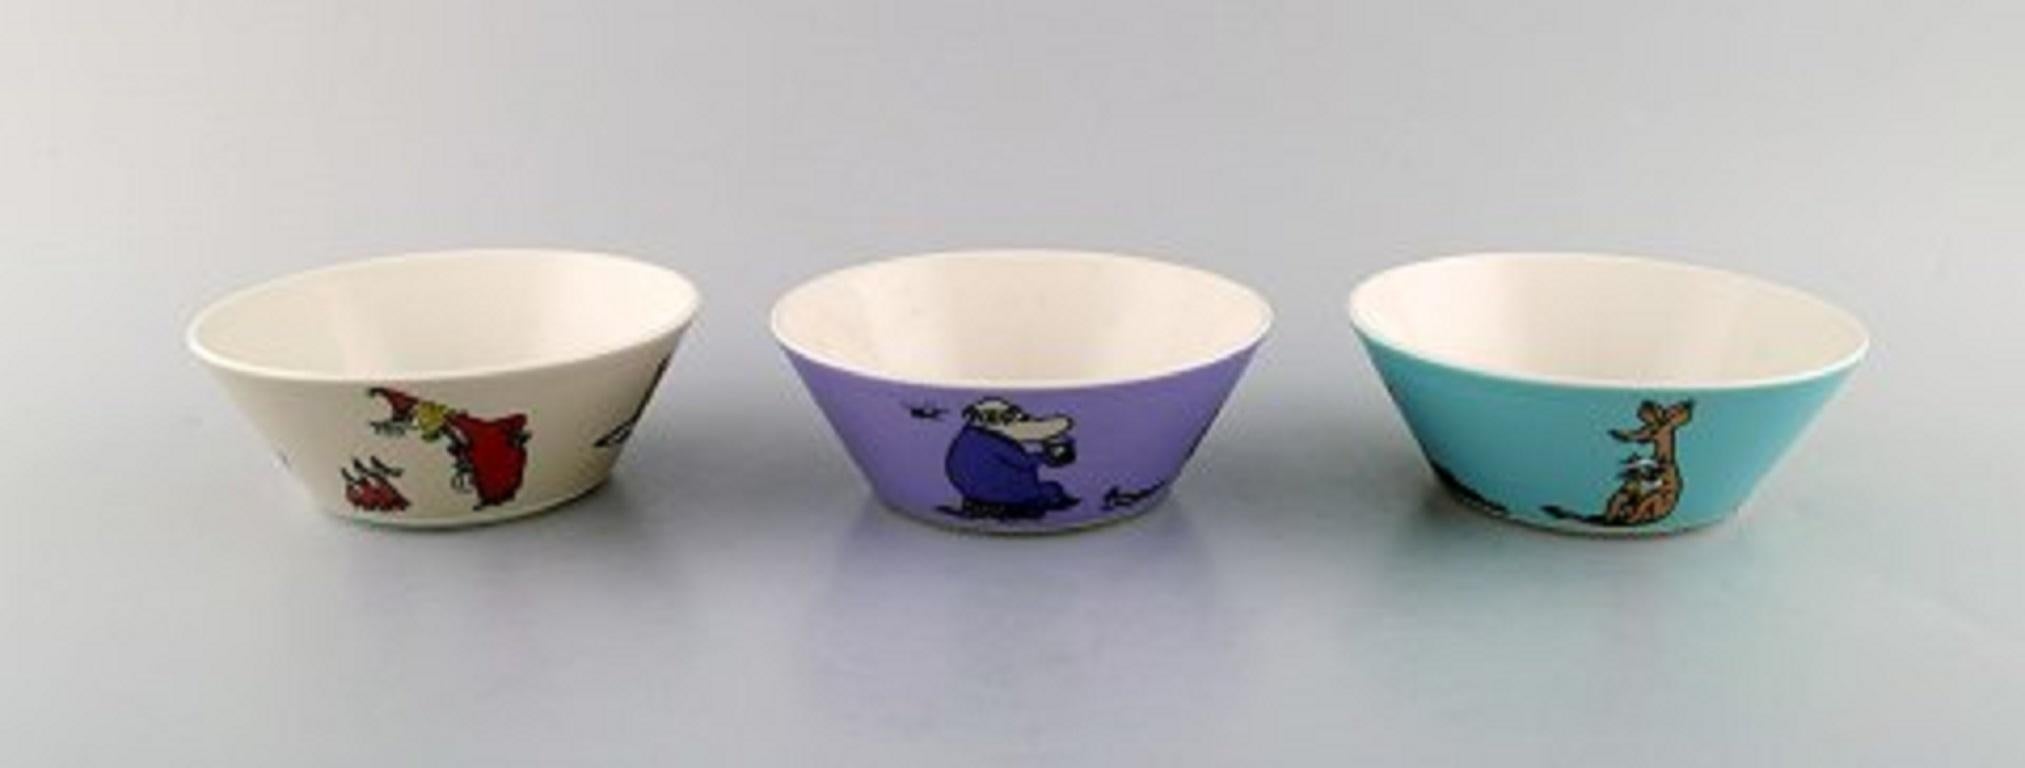 Arabia, Finland. Three porcelain bowls with motifs from 